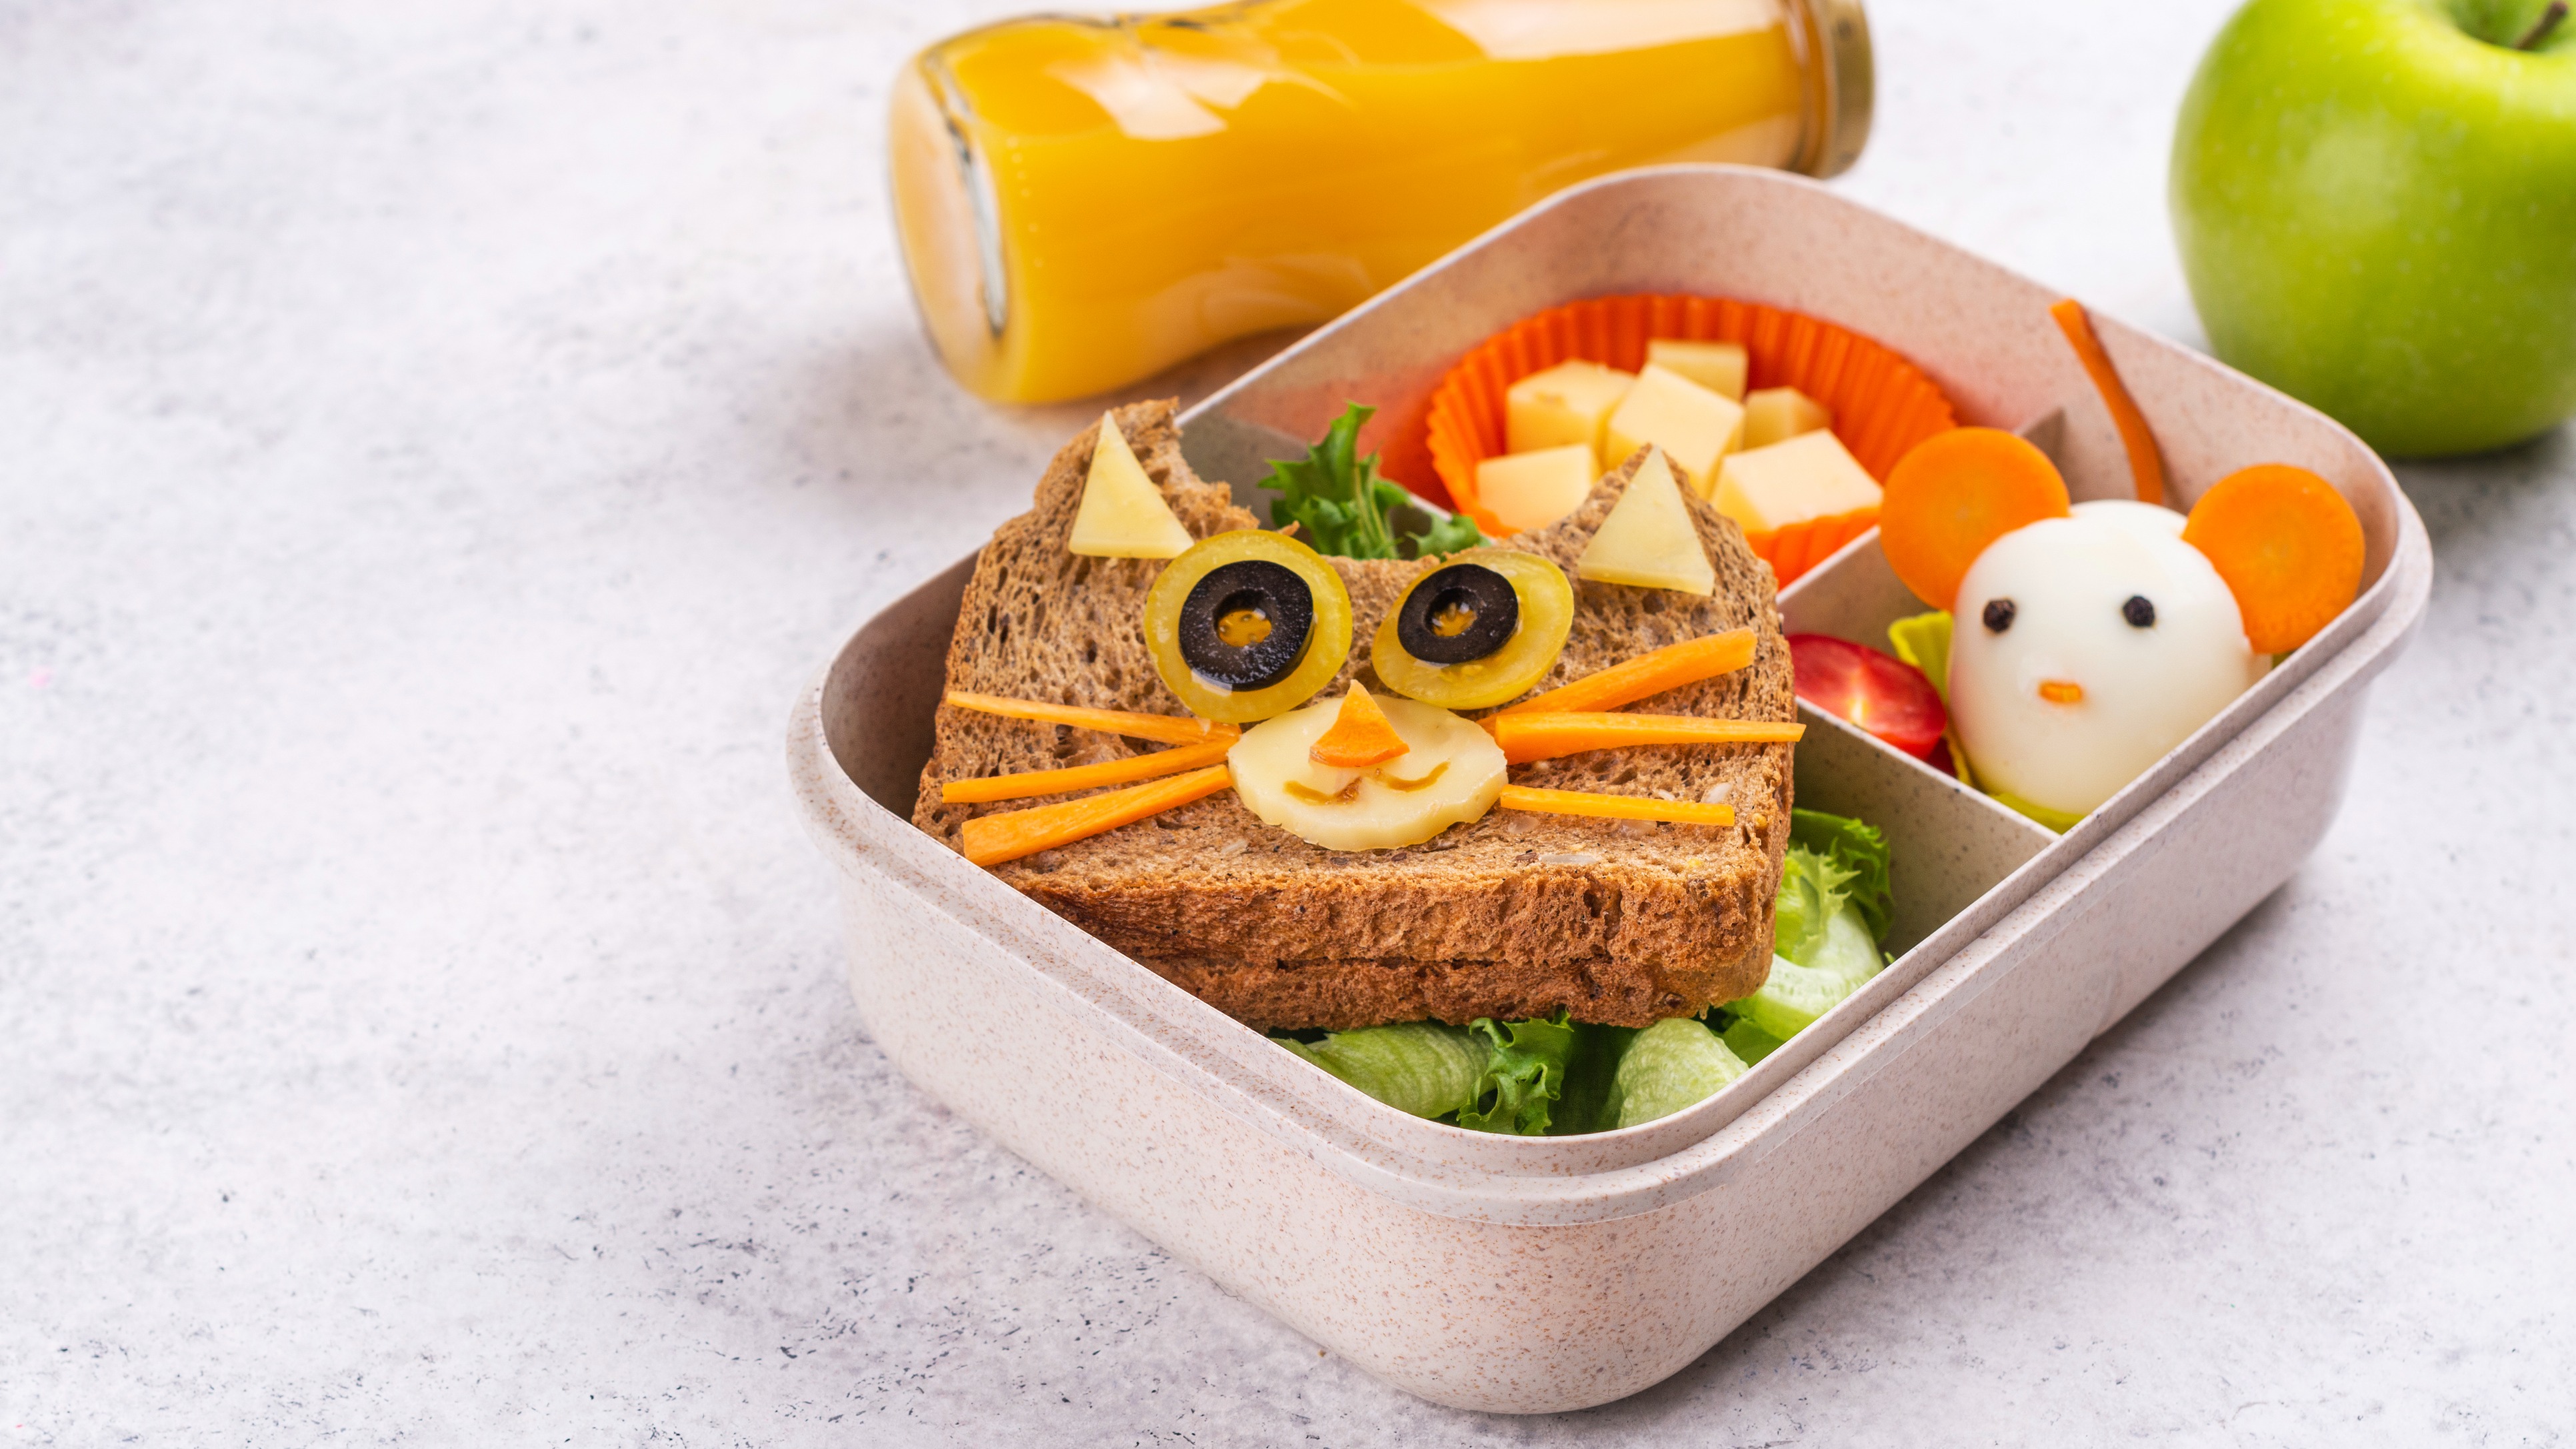 Packed School Lunches For Hot Weather